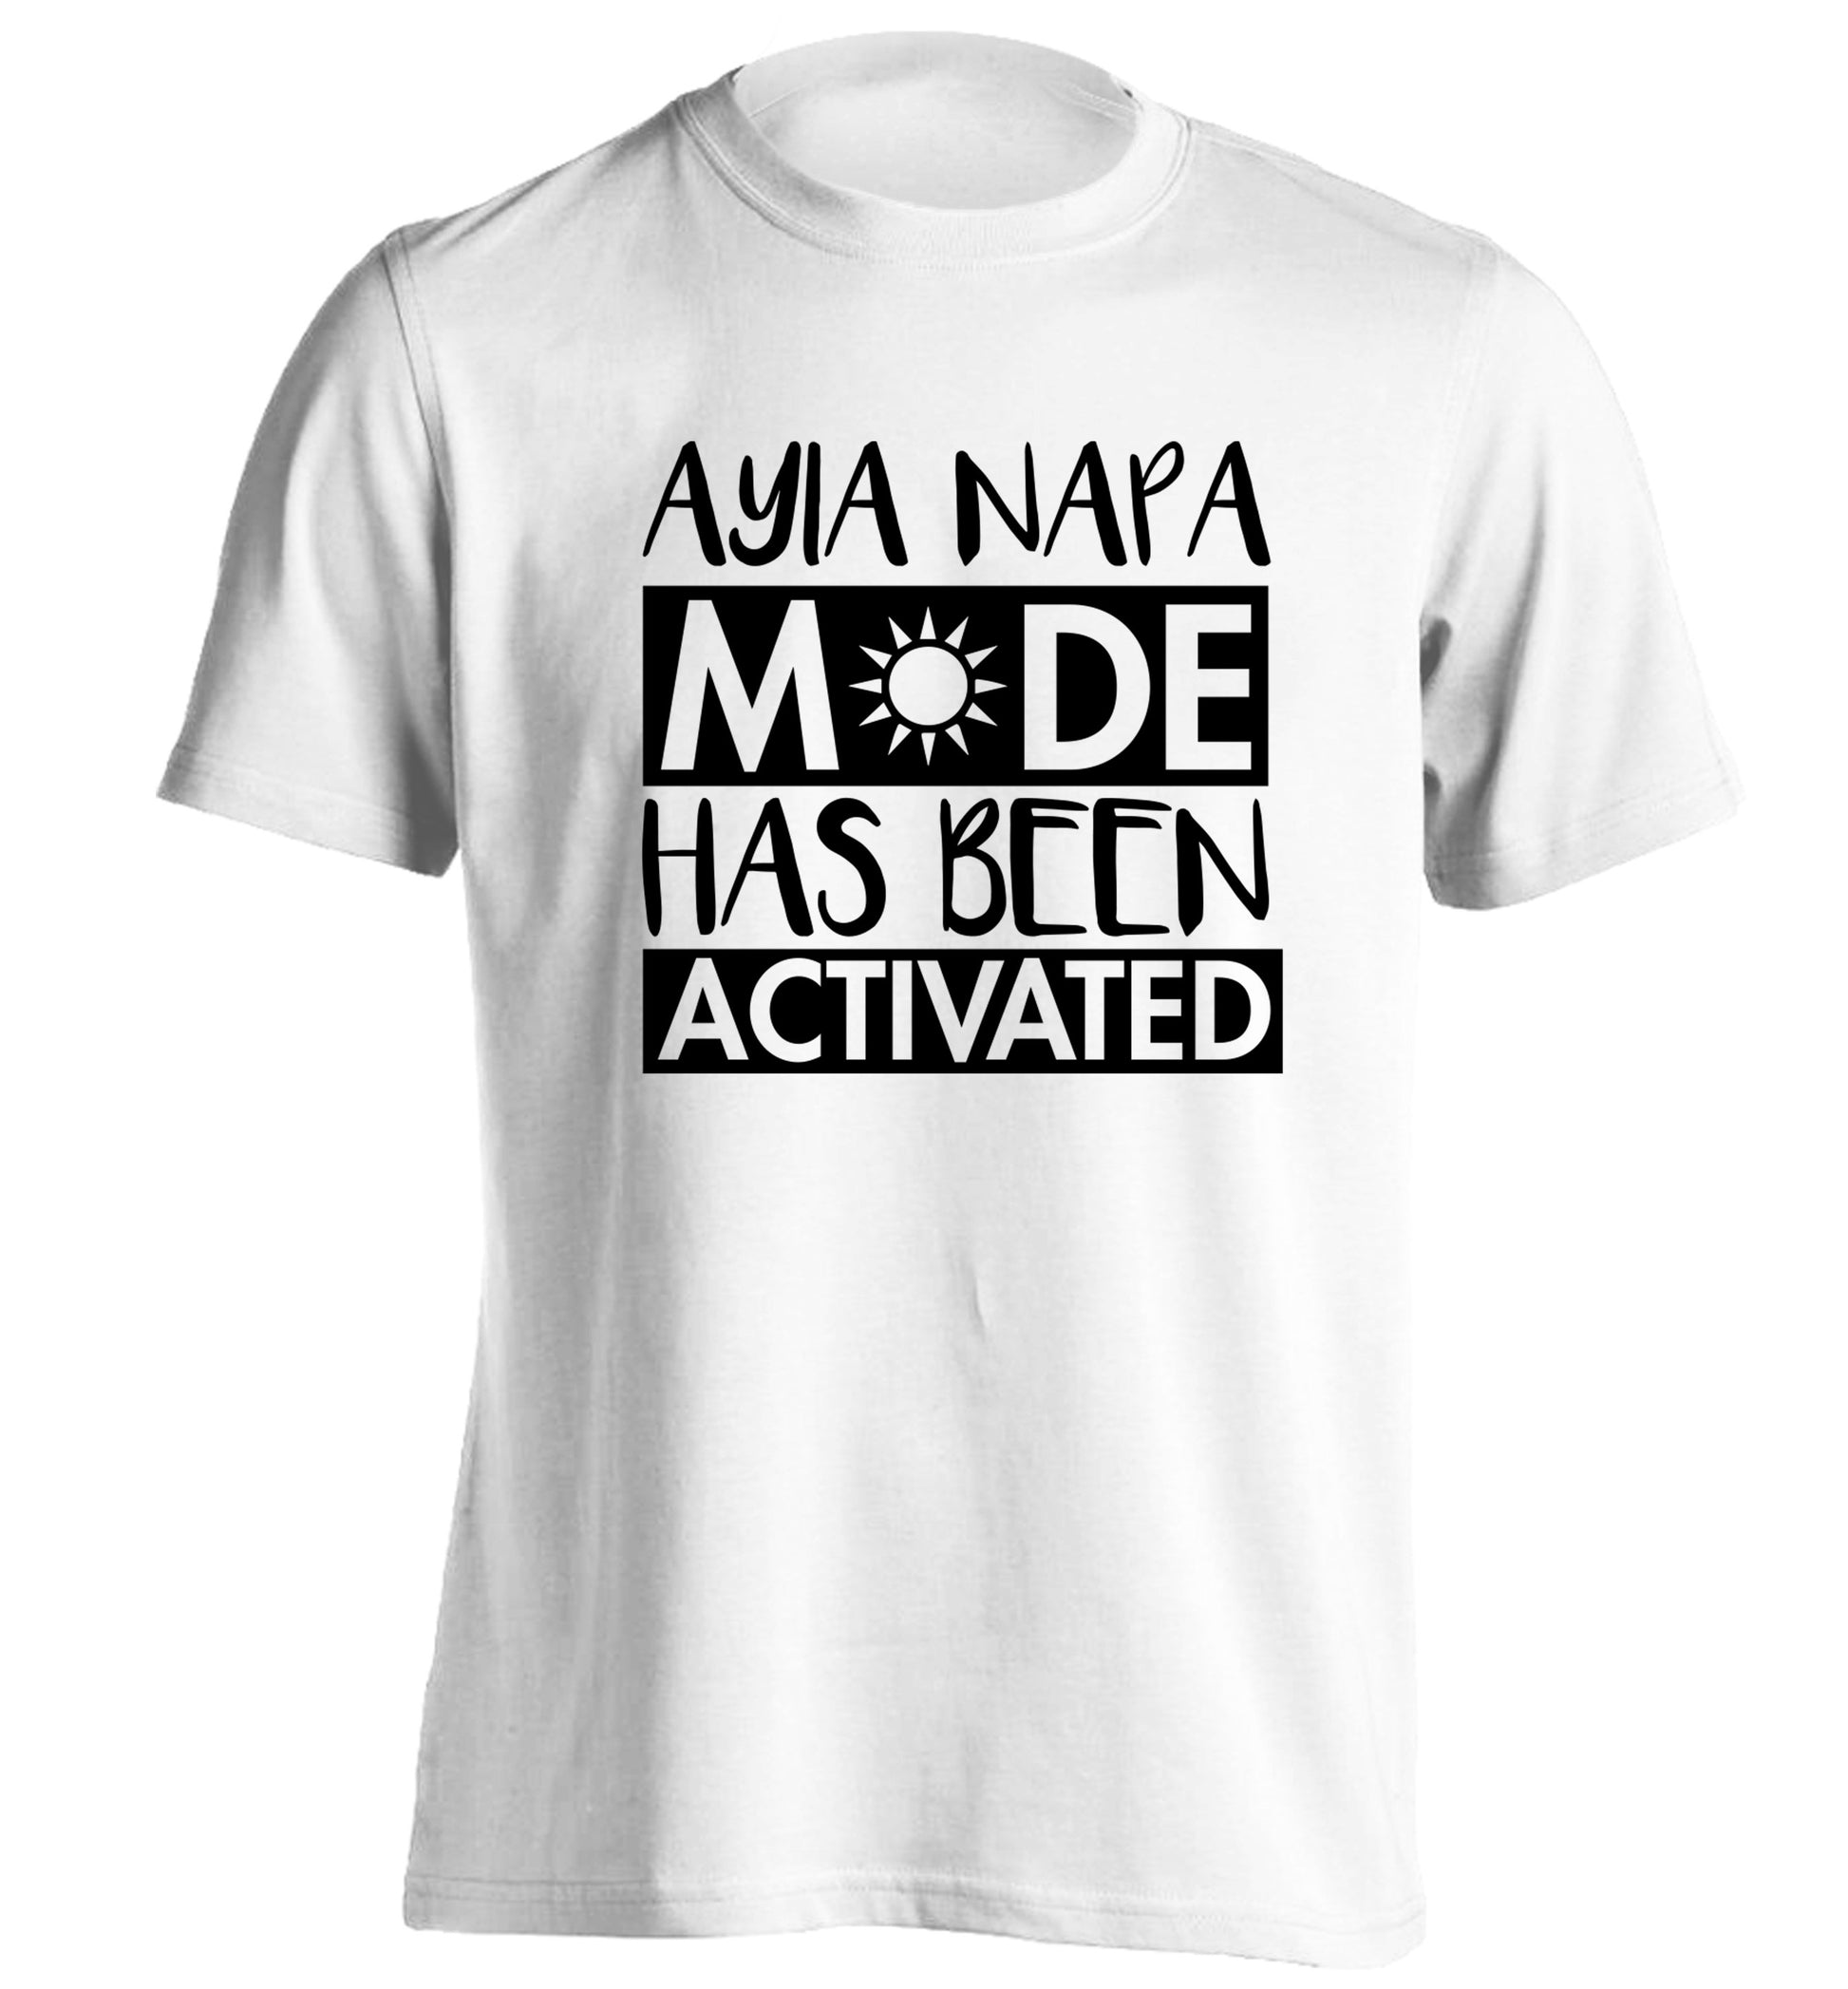 Aiya Napa mode has been activated adults unisex white Tshirt 2XL